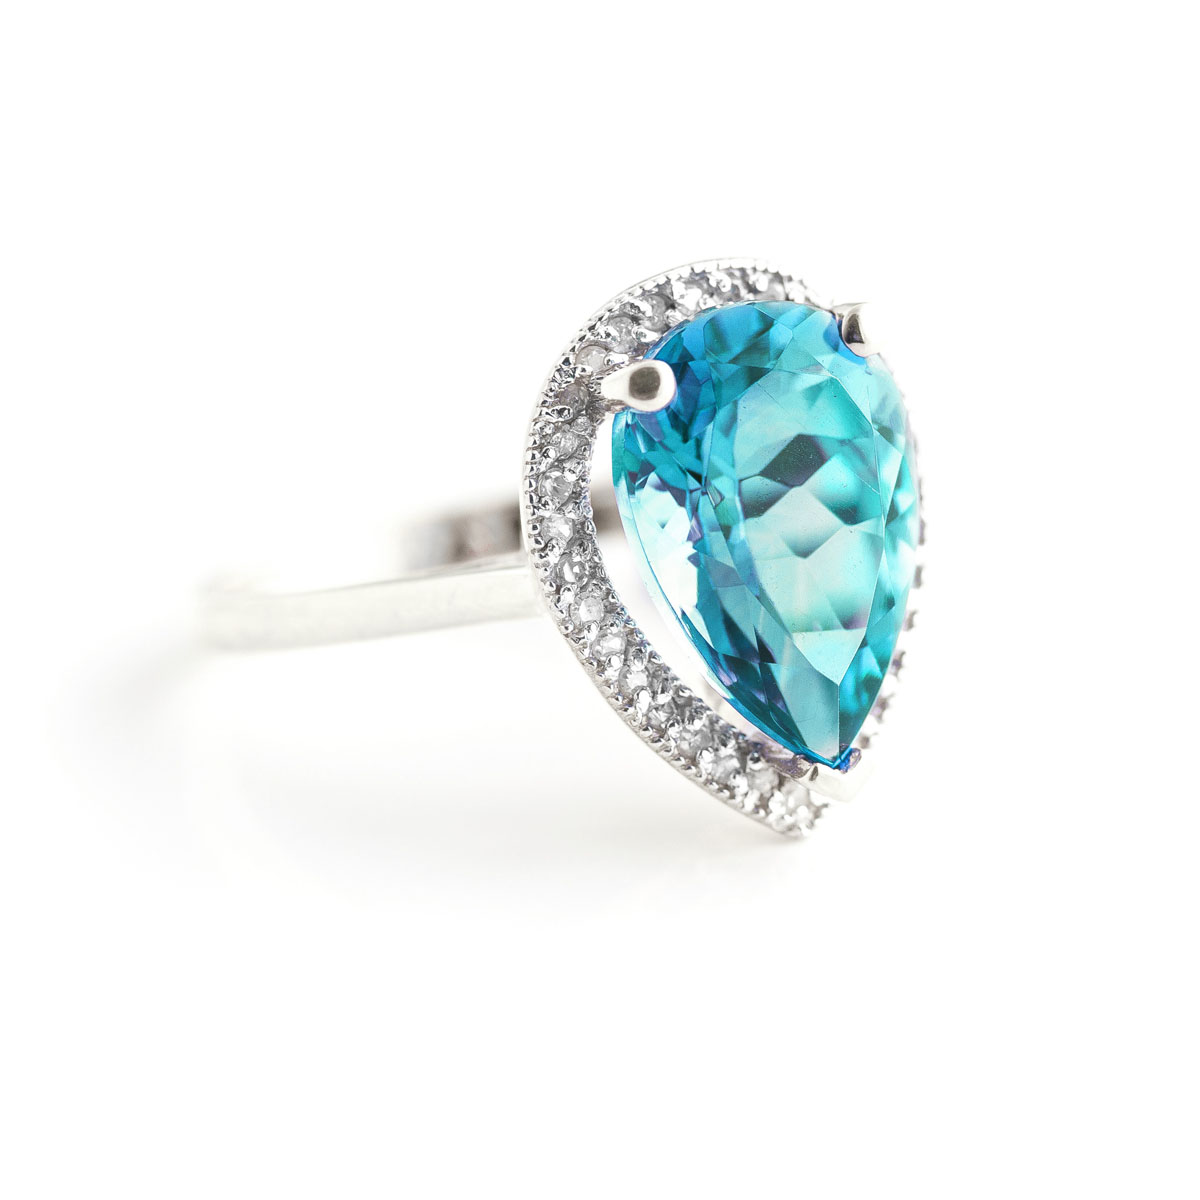 Blue Topaz Halo Ring 4.66 ctw in 18ct White Gold